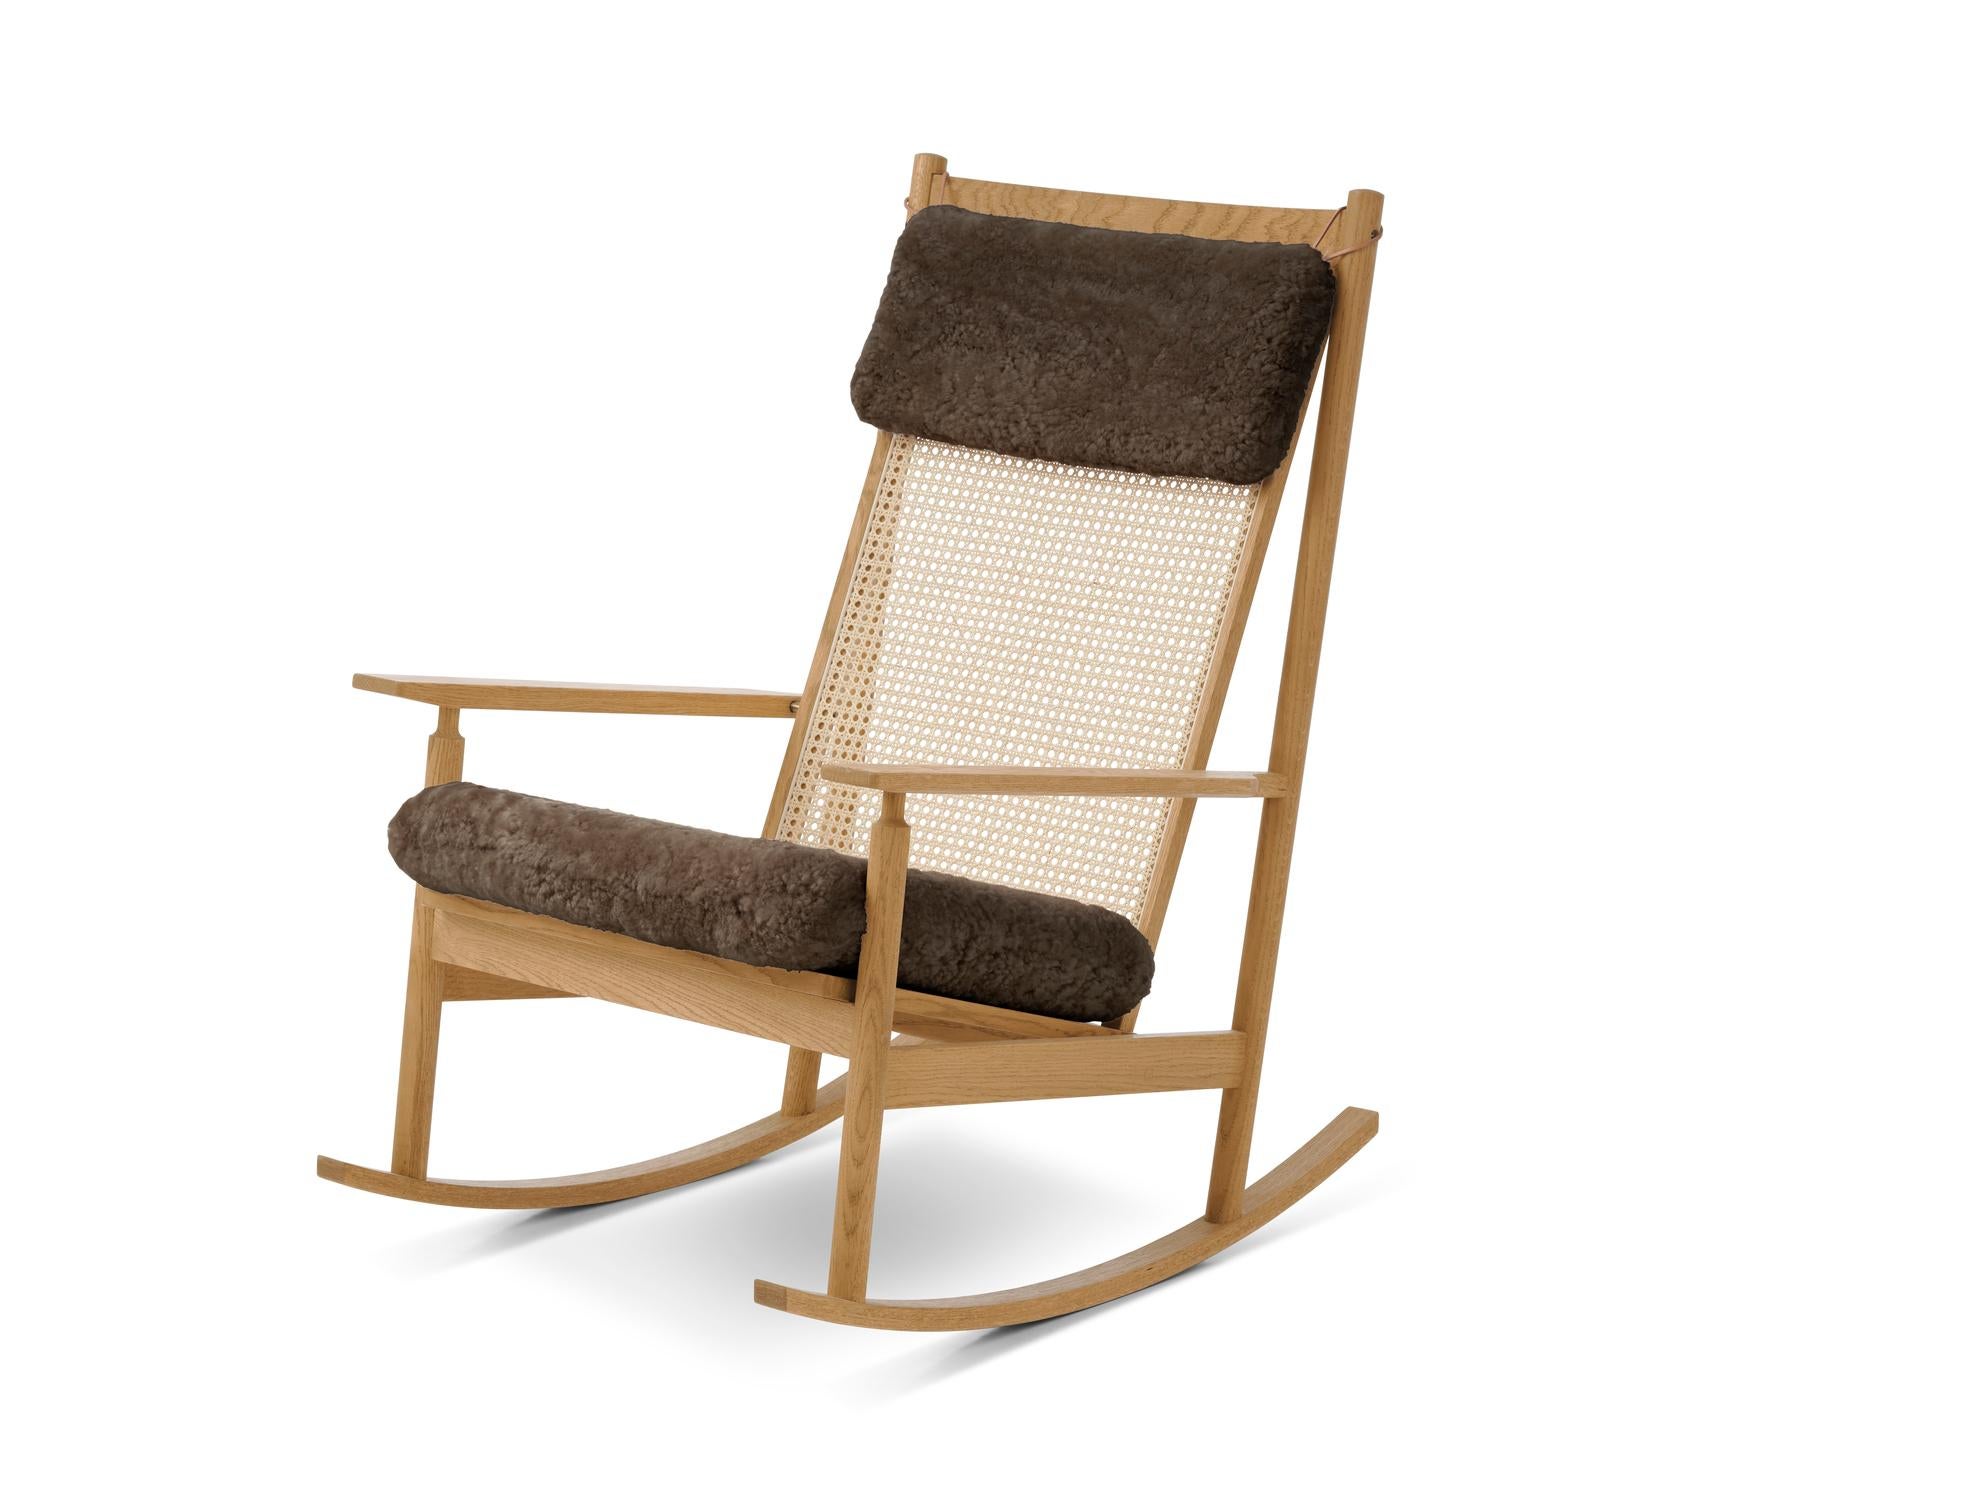 Swing rocking chair sheepskin oak drake by Warm Nordic
Dimensions: D91 x W68 x H 103 cm
Material: Wood, Foam, Rubber springs, French cane, Textile or leather upholstery, Oak, Sheepskin upholstery
Weight: 16.5 kg
Also available in different colours,